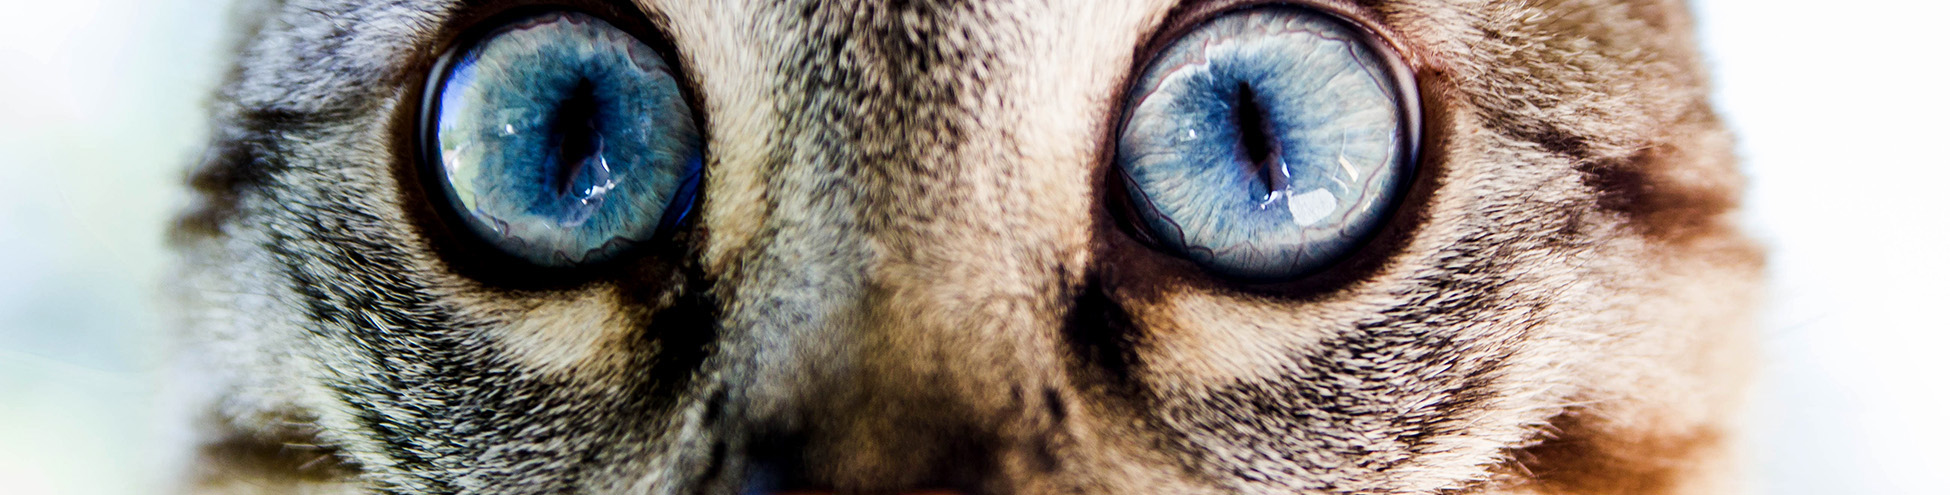 Cat with big blue eyes